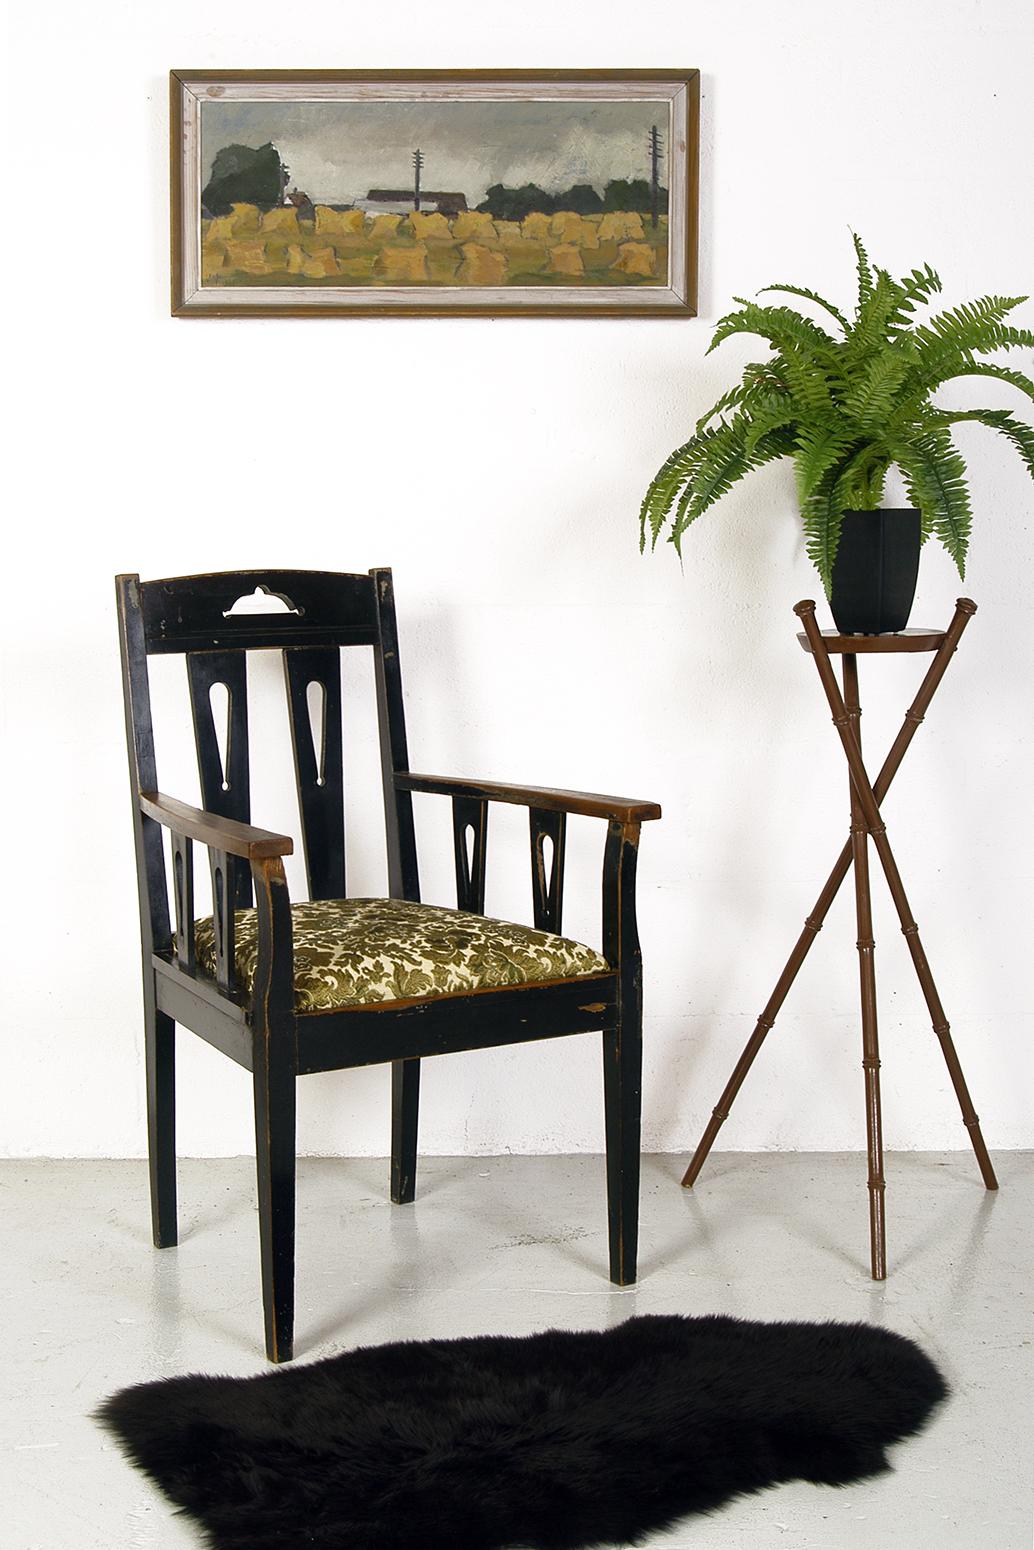 An elegant, and very solid ebonized Swedish armchair dating from the 1880s, with paint loss in all the right places! The seat is nice and wide, which makes it particularly comfortable for an occasional chair - especially when draped with a sheepskin